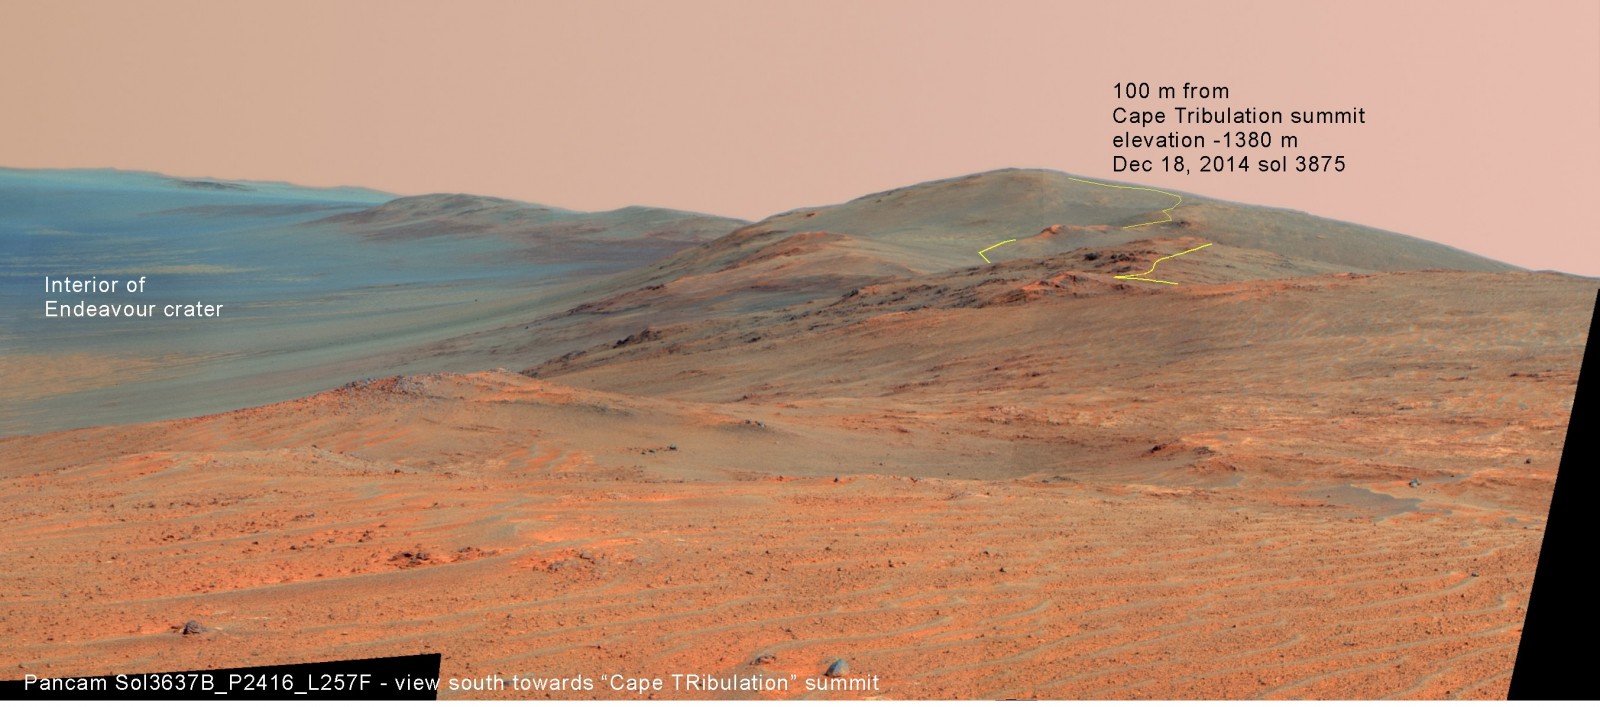 NASA Opportunity rovers current location near the summit of Cape Tribulation in late Dec 2014 on Sol 3875 is shown in this prior panoramic view looking south along the rim of Endeavour crater. It is centered on the highest part of the rim of Cape Tribulation. It was acquired back on sol 3767 and shows the subsequent traverse of Opportunity as a yellow line. Note that Opportunities traverse drops out of view periodically as it negotiates valleys between ridges.  Credit: NASA/JPL/Cornell/NMMNHS/Larry Crumpler